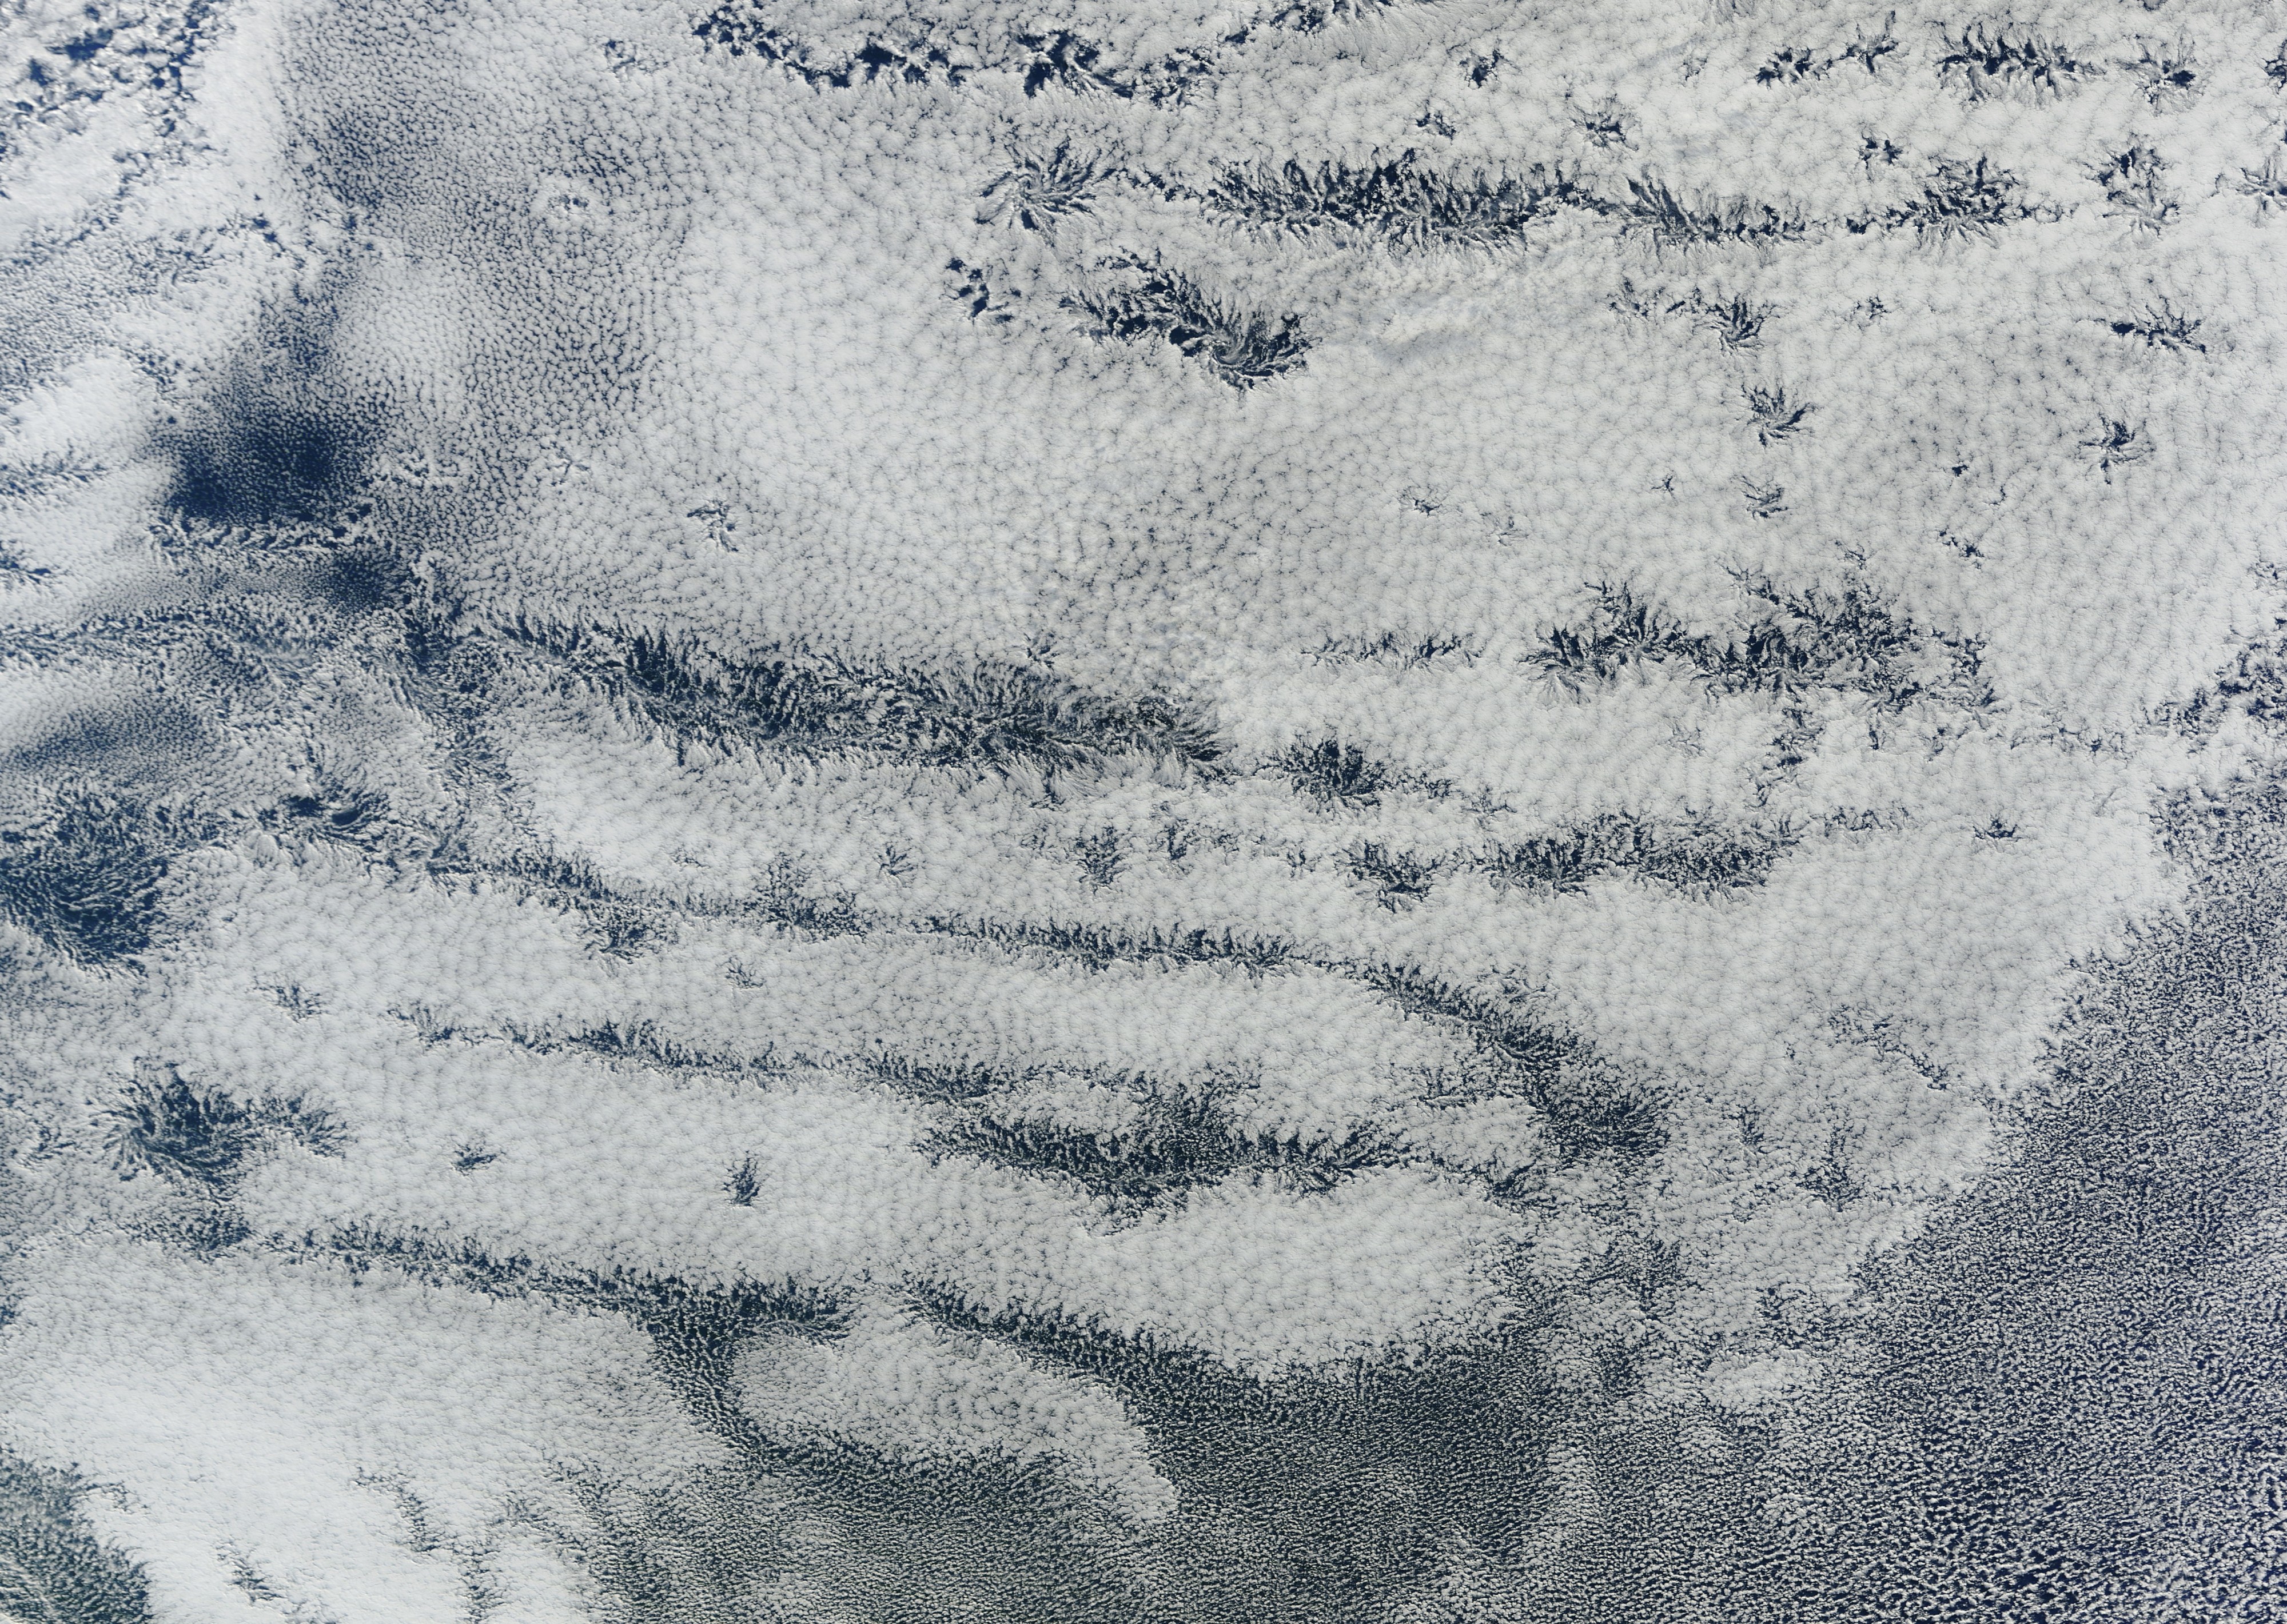 Actinoform clouds seen from Space